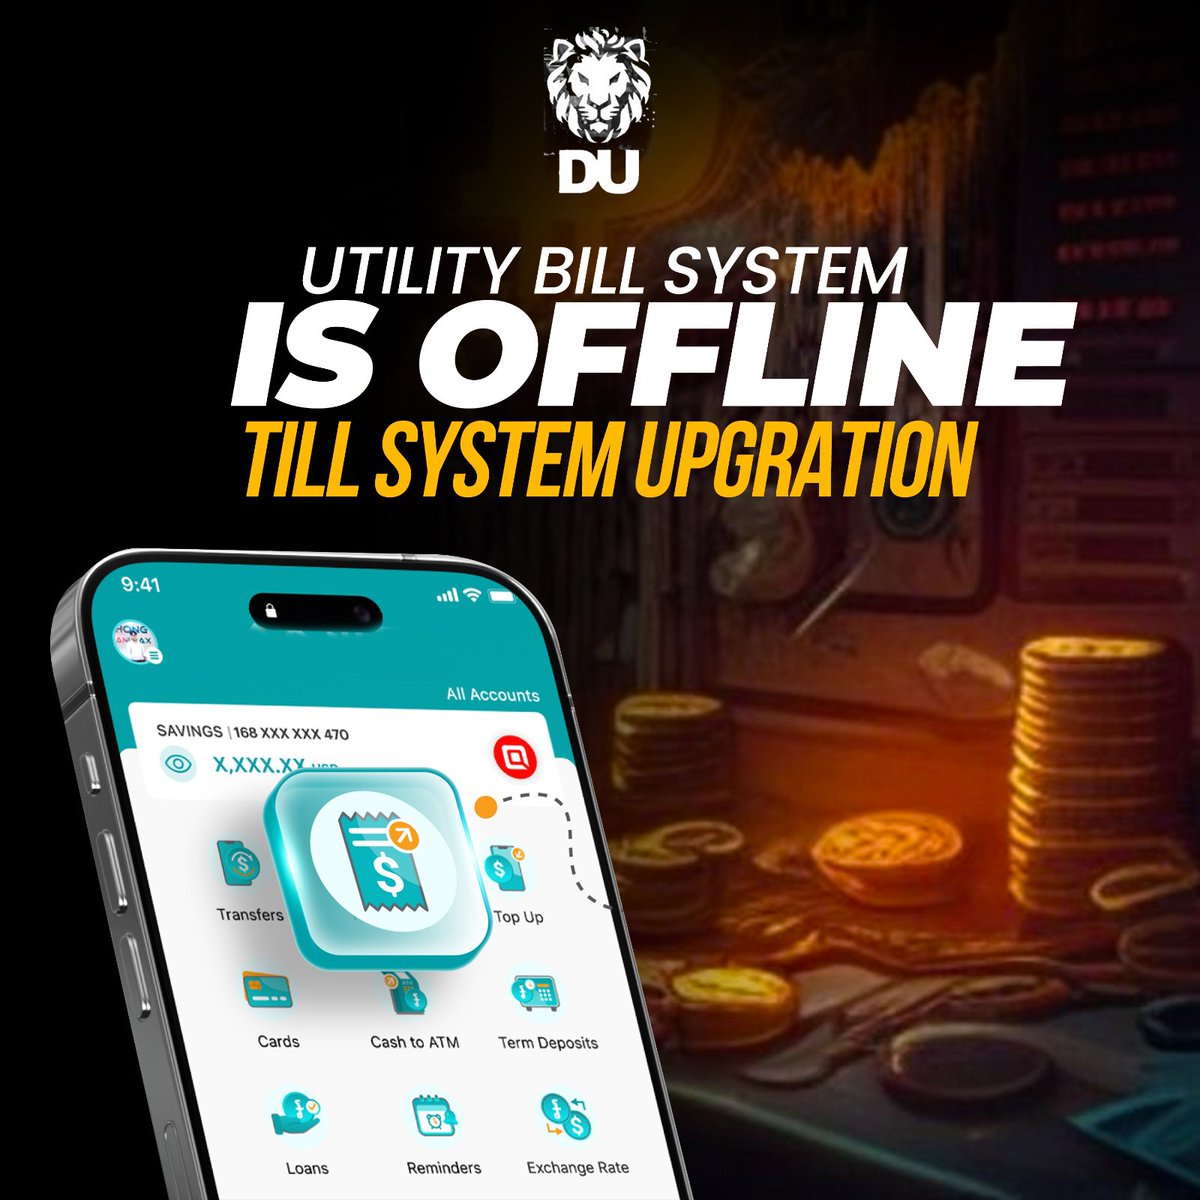 📢 Notice:

 Our utility bill payment system is currently offline for system upgrades. We apologize for any inconvenience caused. Rest assured, we are working diligently to complete the upgrades as quickly as possible.

 #DUtoken #DU_Solutions  #UtilityBillPayment #SystemUpgrade